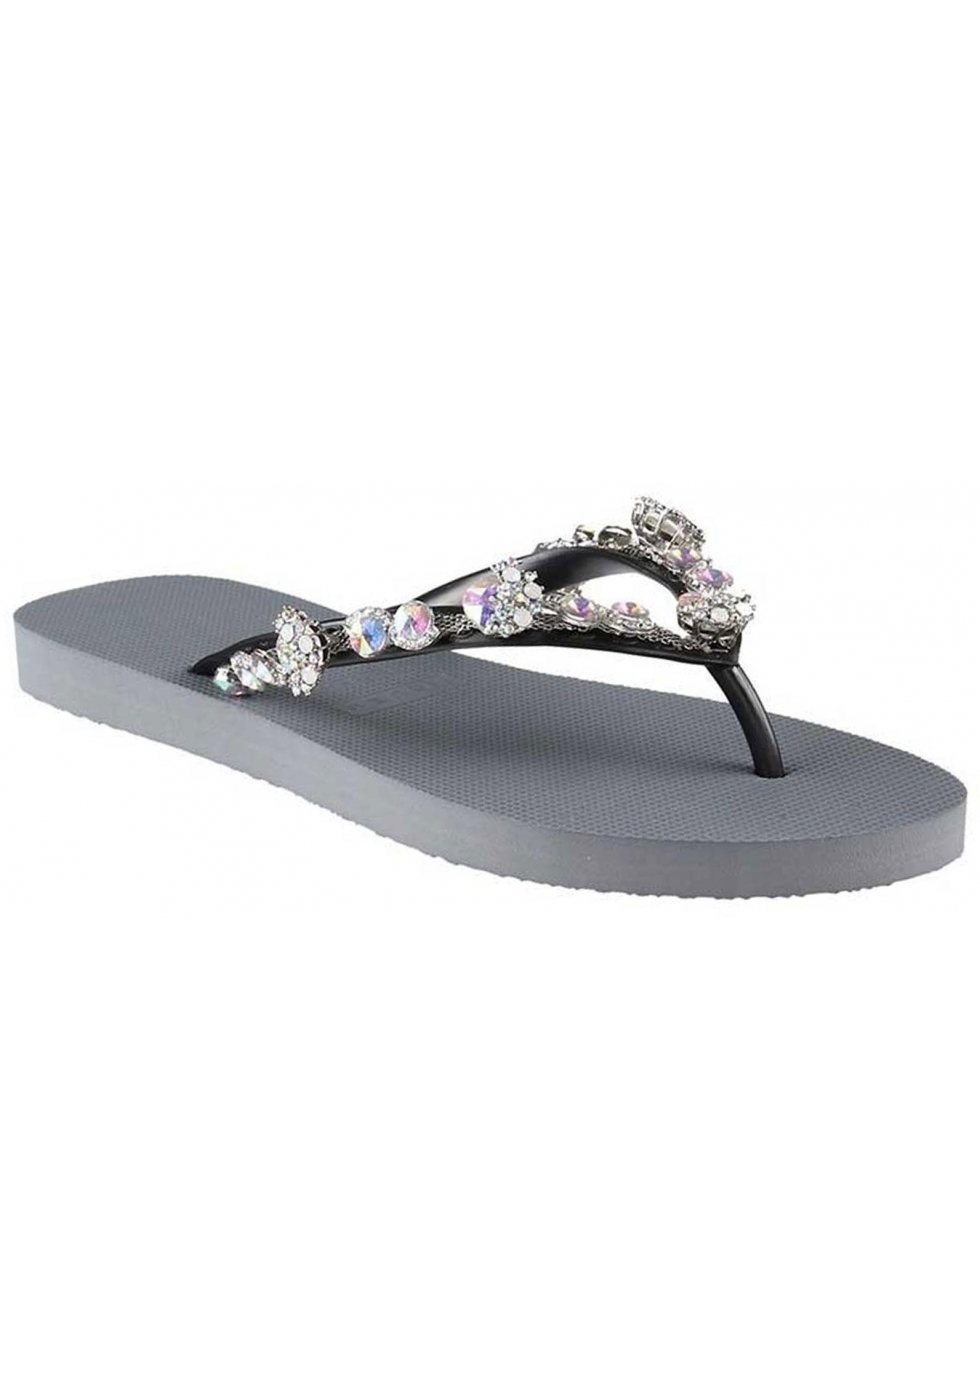 Uzurii women's thong slippers in silver gray rubber - Italian Boutique